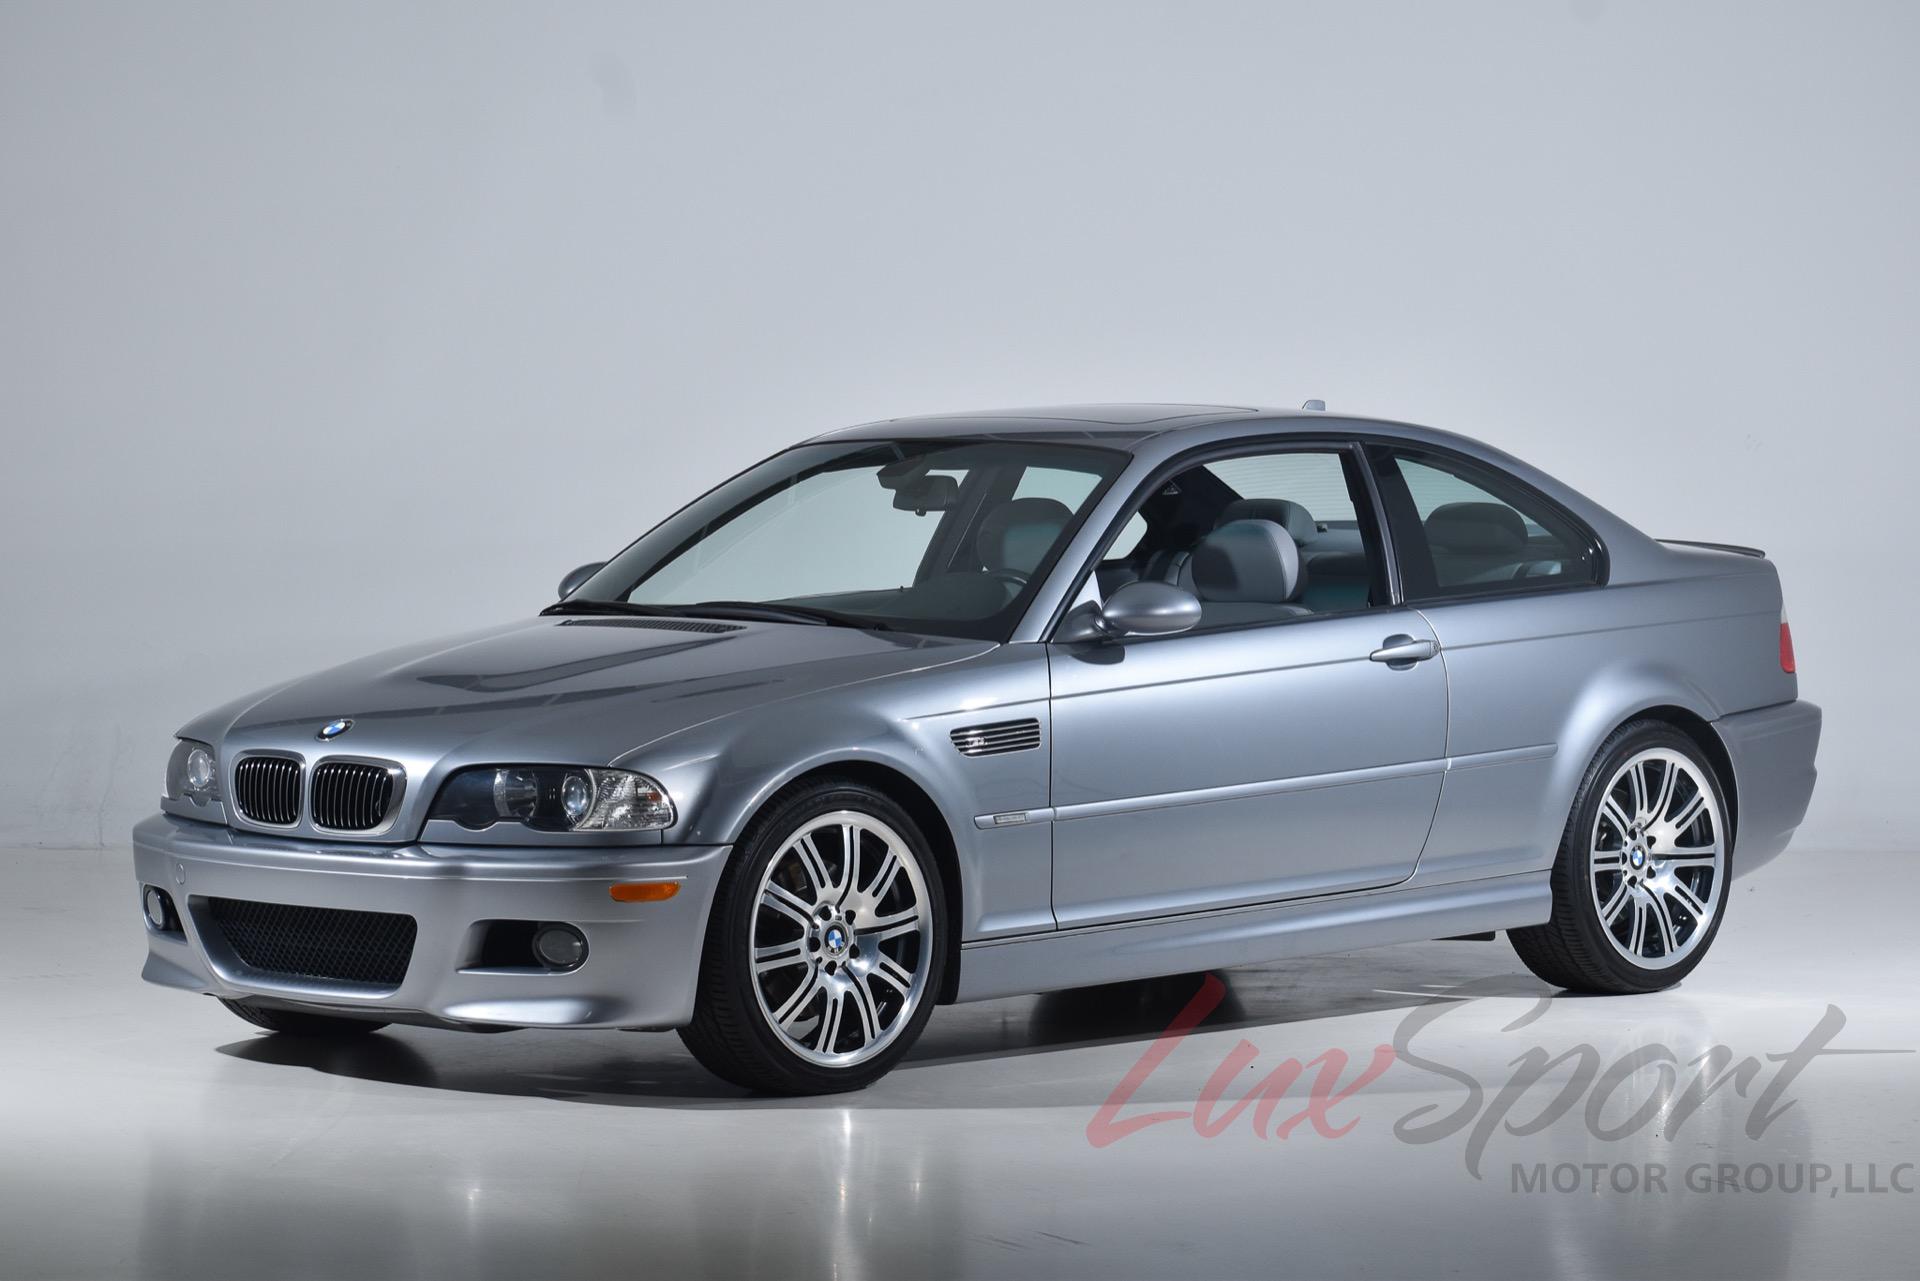 2006 BMW E46 M3 Coupe Stock 2006128 for sale near